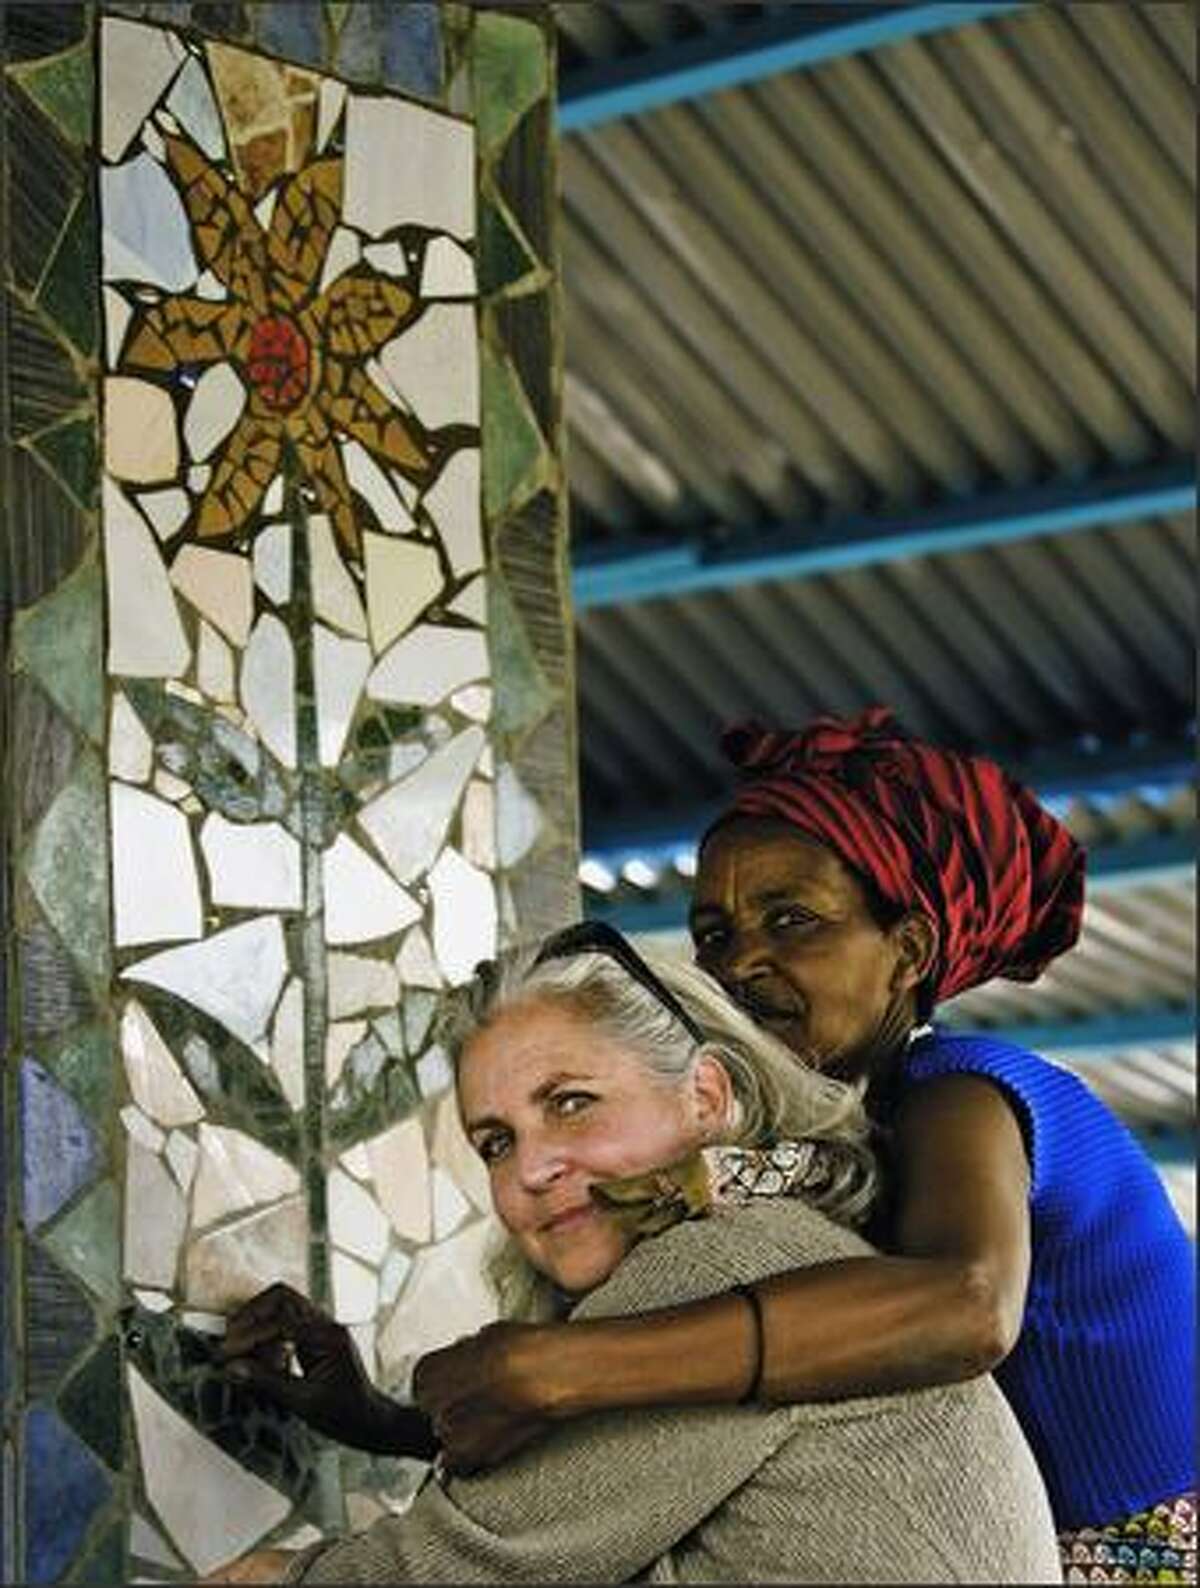 Terry Tempest Williams, left, says in her new memoir that learning how to make mosaics helped teach her lessons about life.